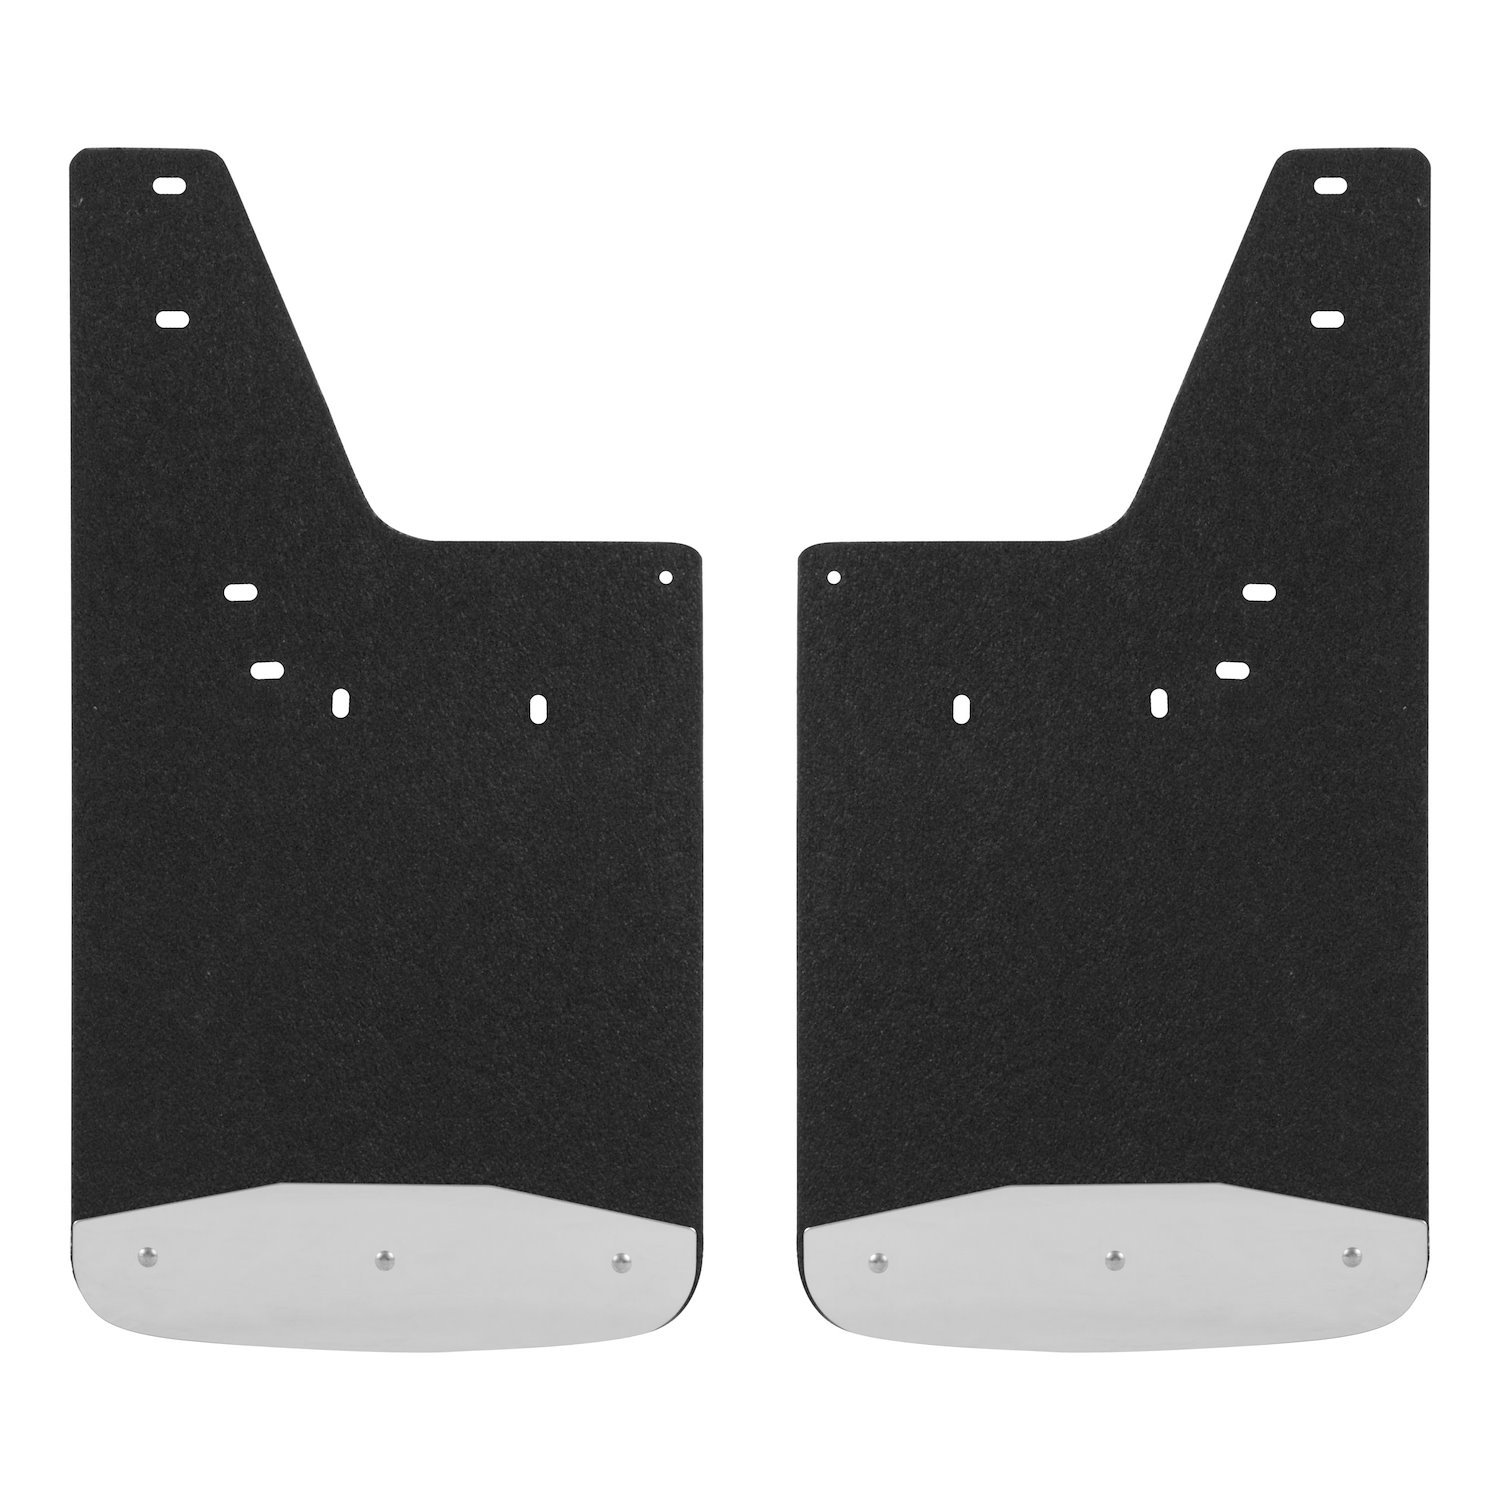 250932 Front 12 in. x 23 in. Rubber Mud Guards Fits Select Dodge, Ram 1500 to 5500